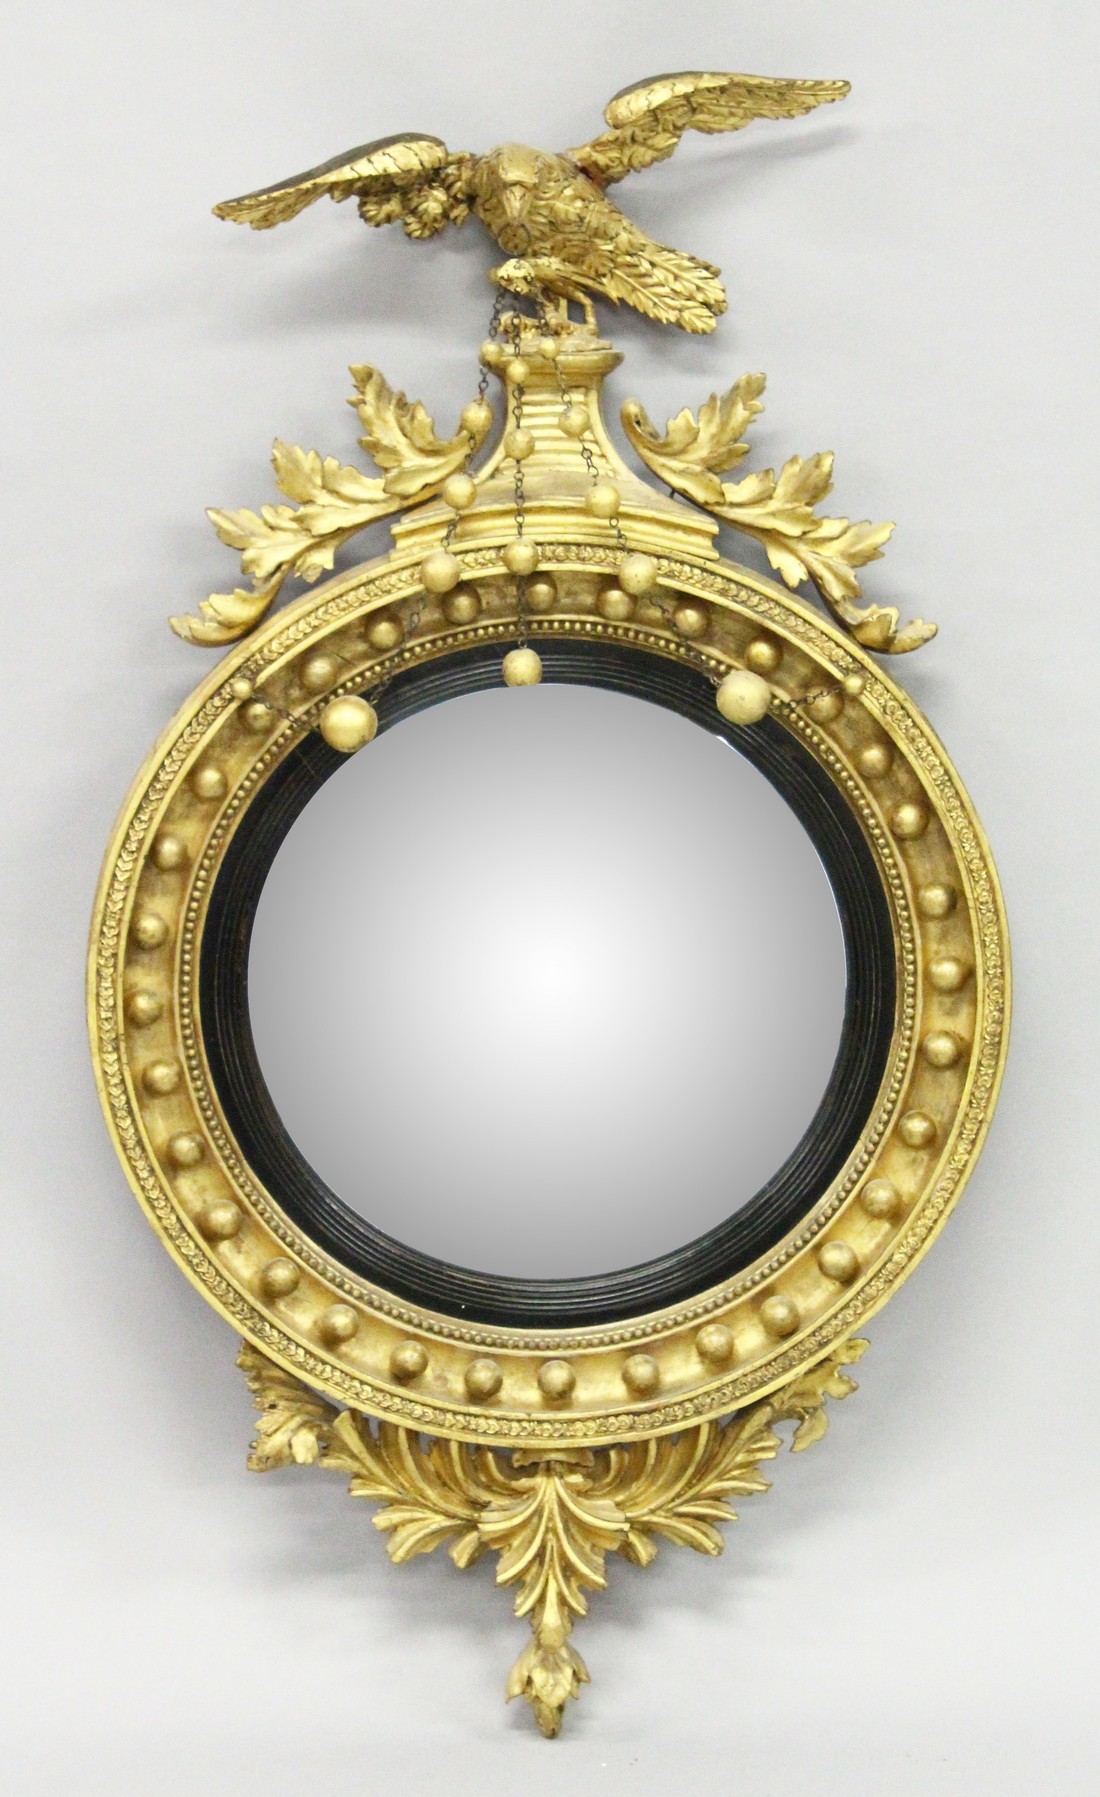 A REGENCY GILT WOOD CONVEX MIRROR with eagle cresting, ball applied frame and curved decoration to